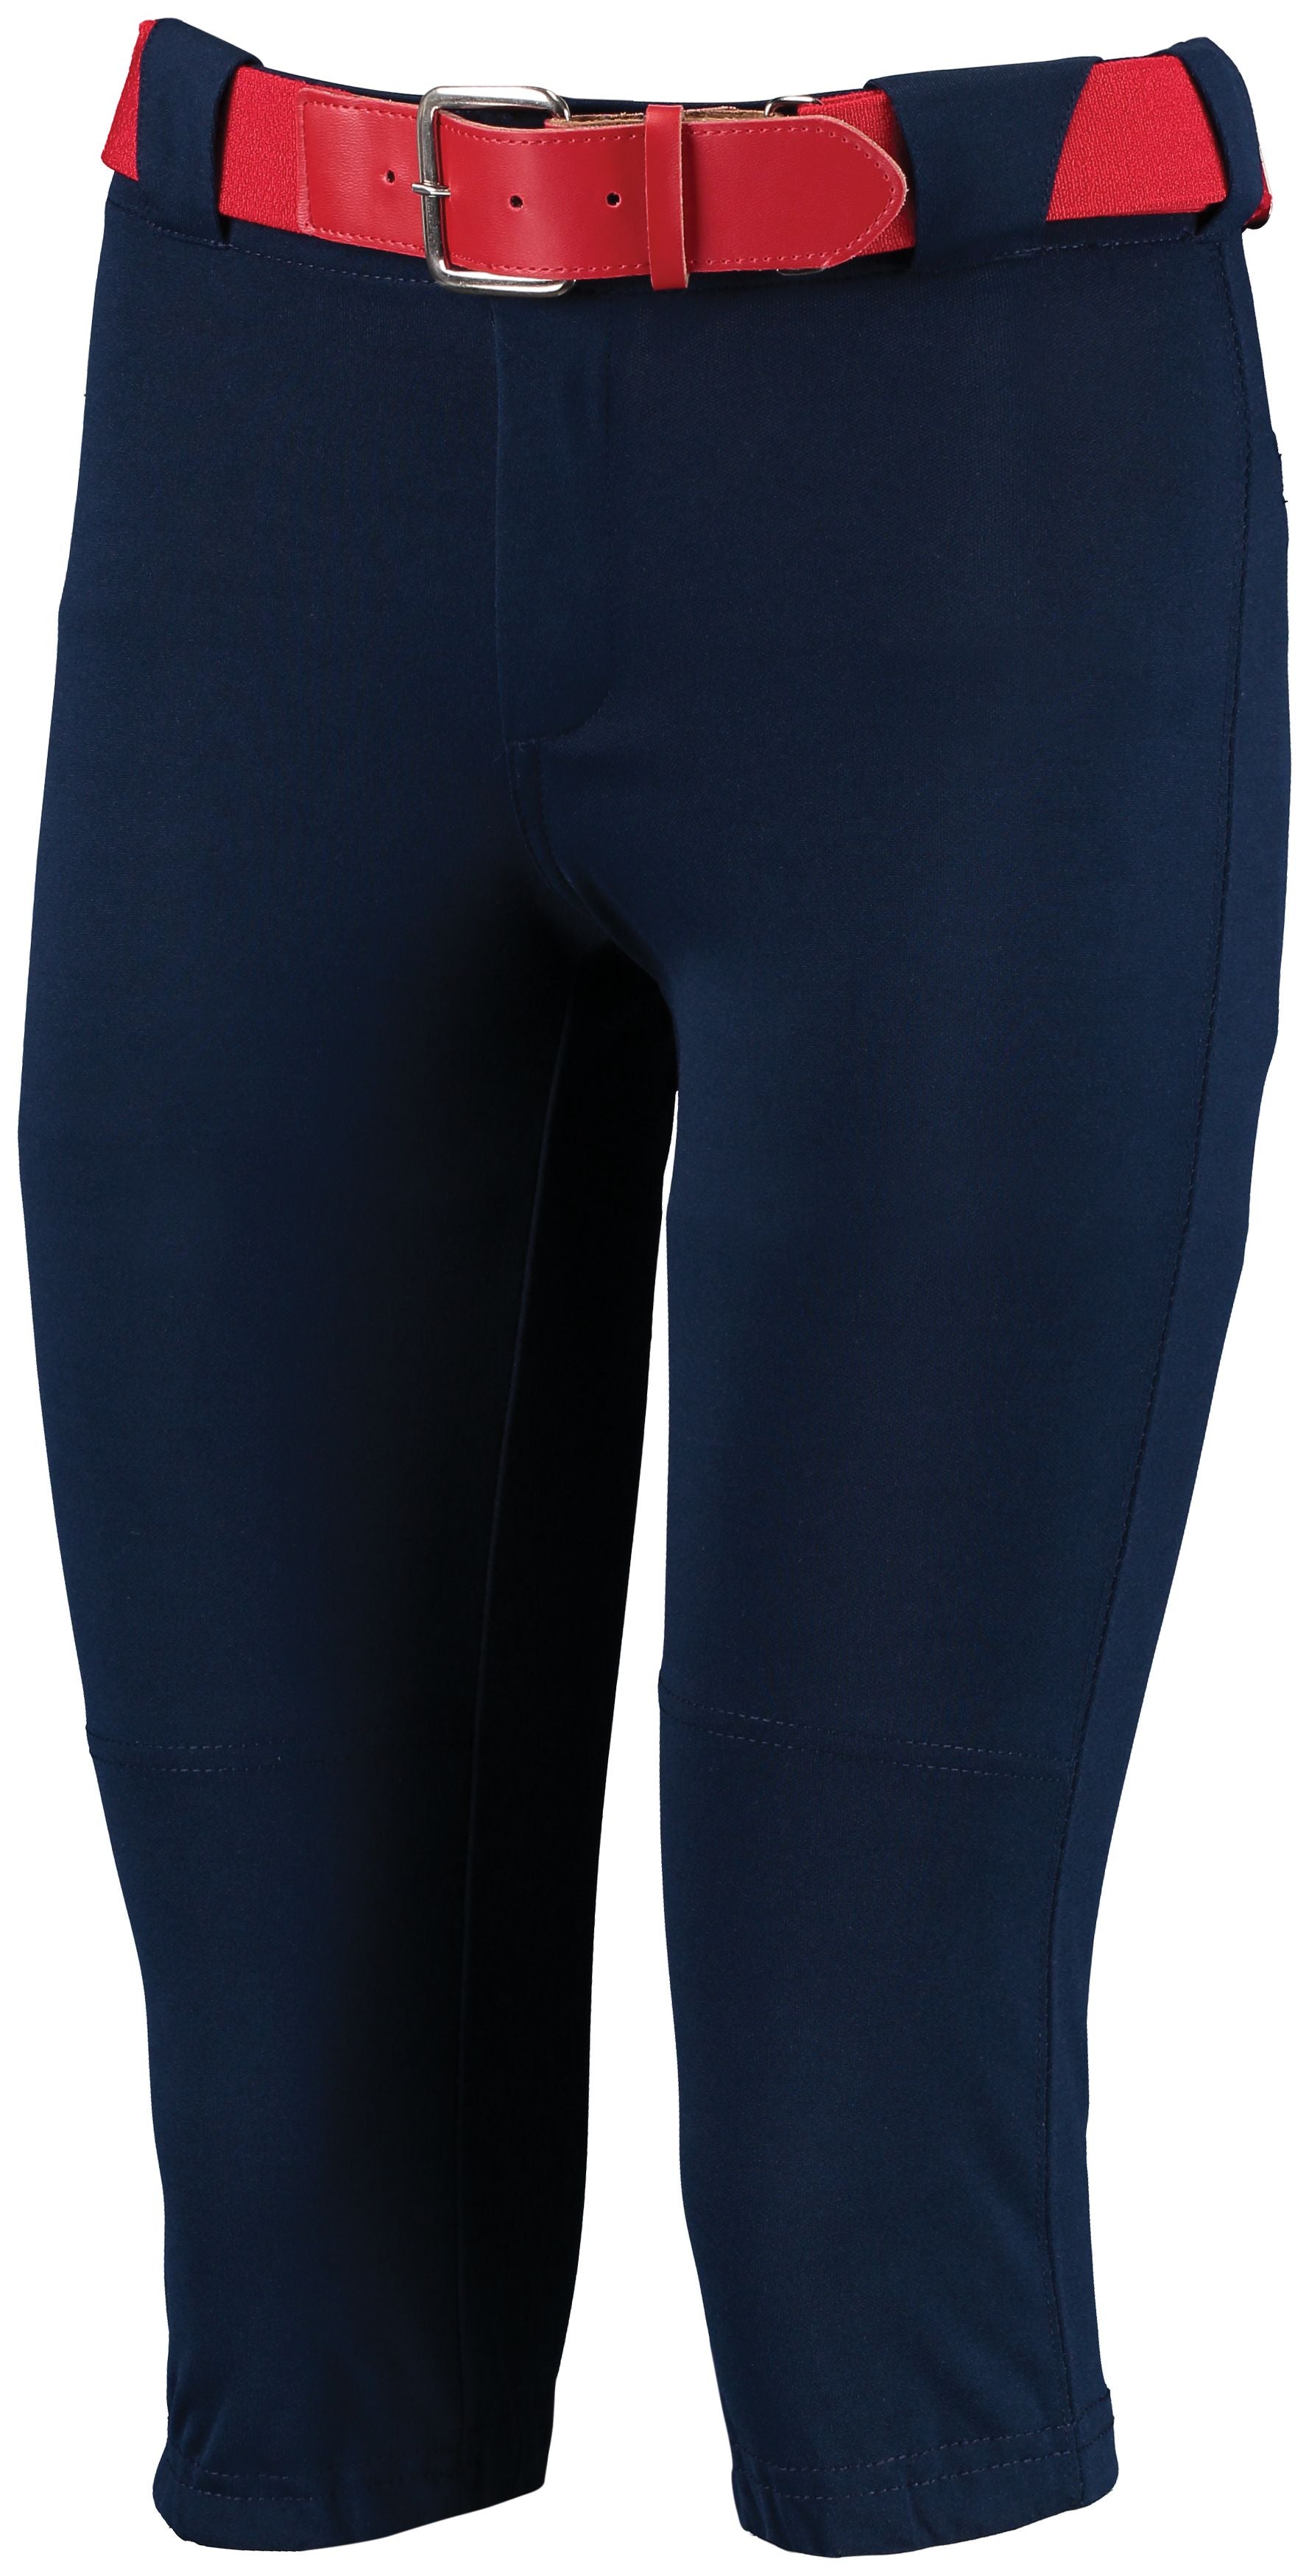 Russell Athletic Ladies Low Rise Knicker Length Pant in Navy  -Part of the Ladies, Softball, Russell-Athletic-Products product lines at KanaleyCreations.com